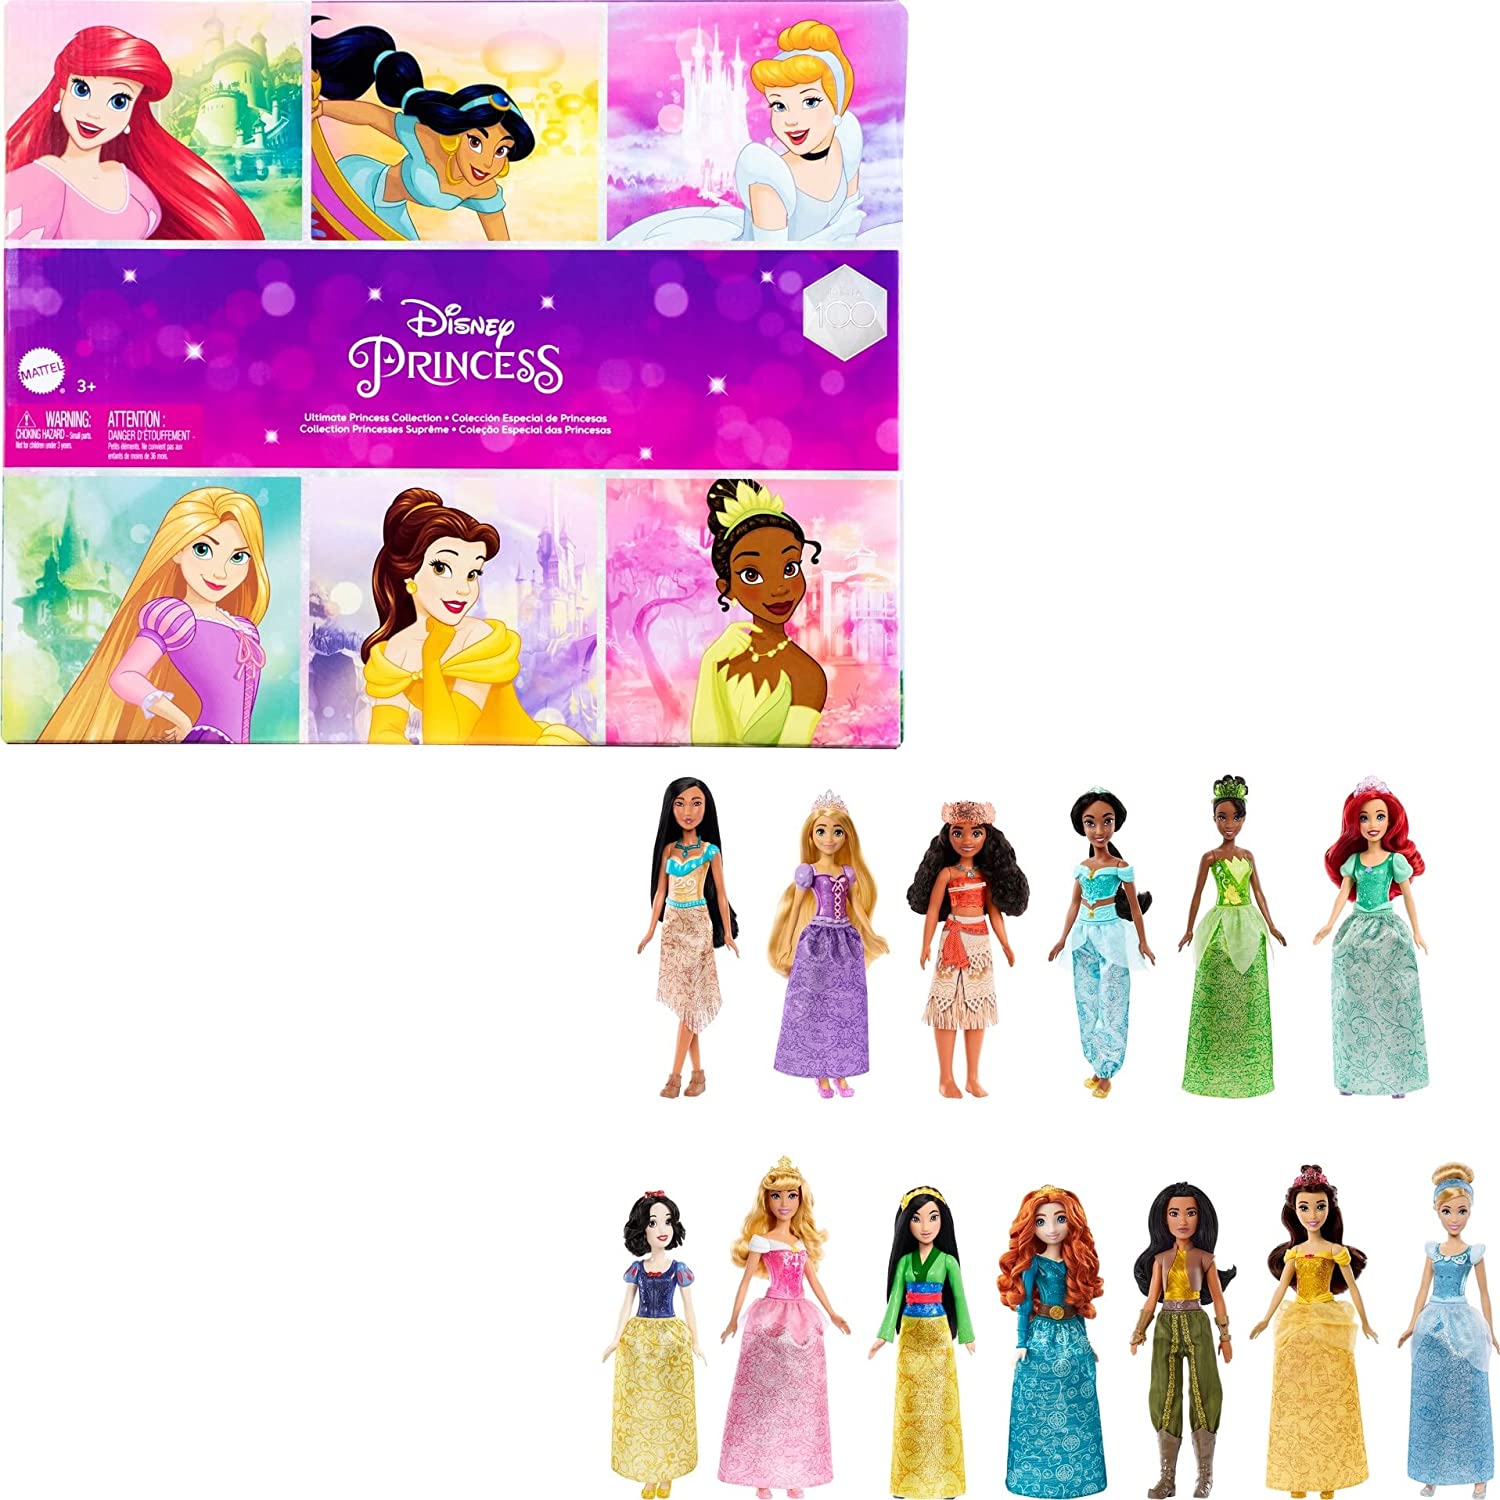 Disney And Mattel Team Up To Launch Re-imagined Line Of Disney Princess  Dolls Good Morning America